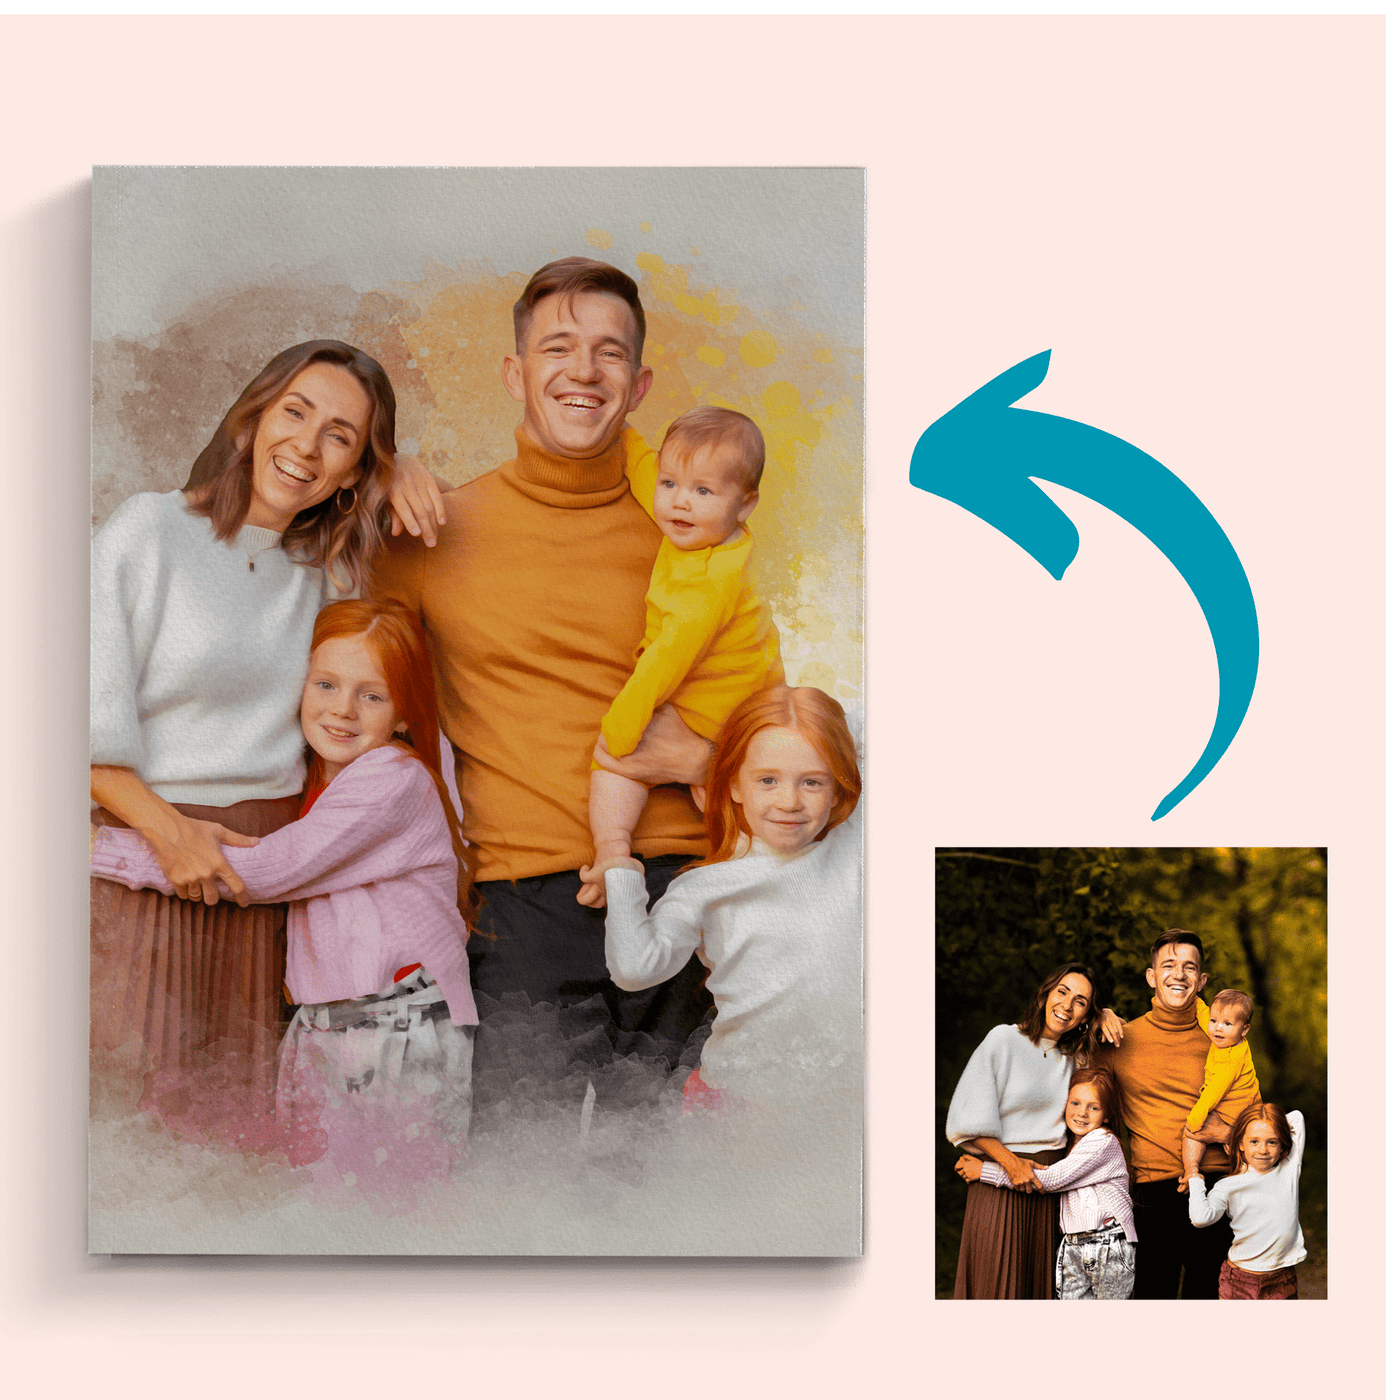 photo recreation of a family photo transforming from an old photo into a new and improved version.